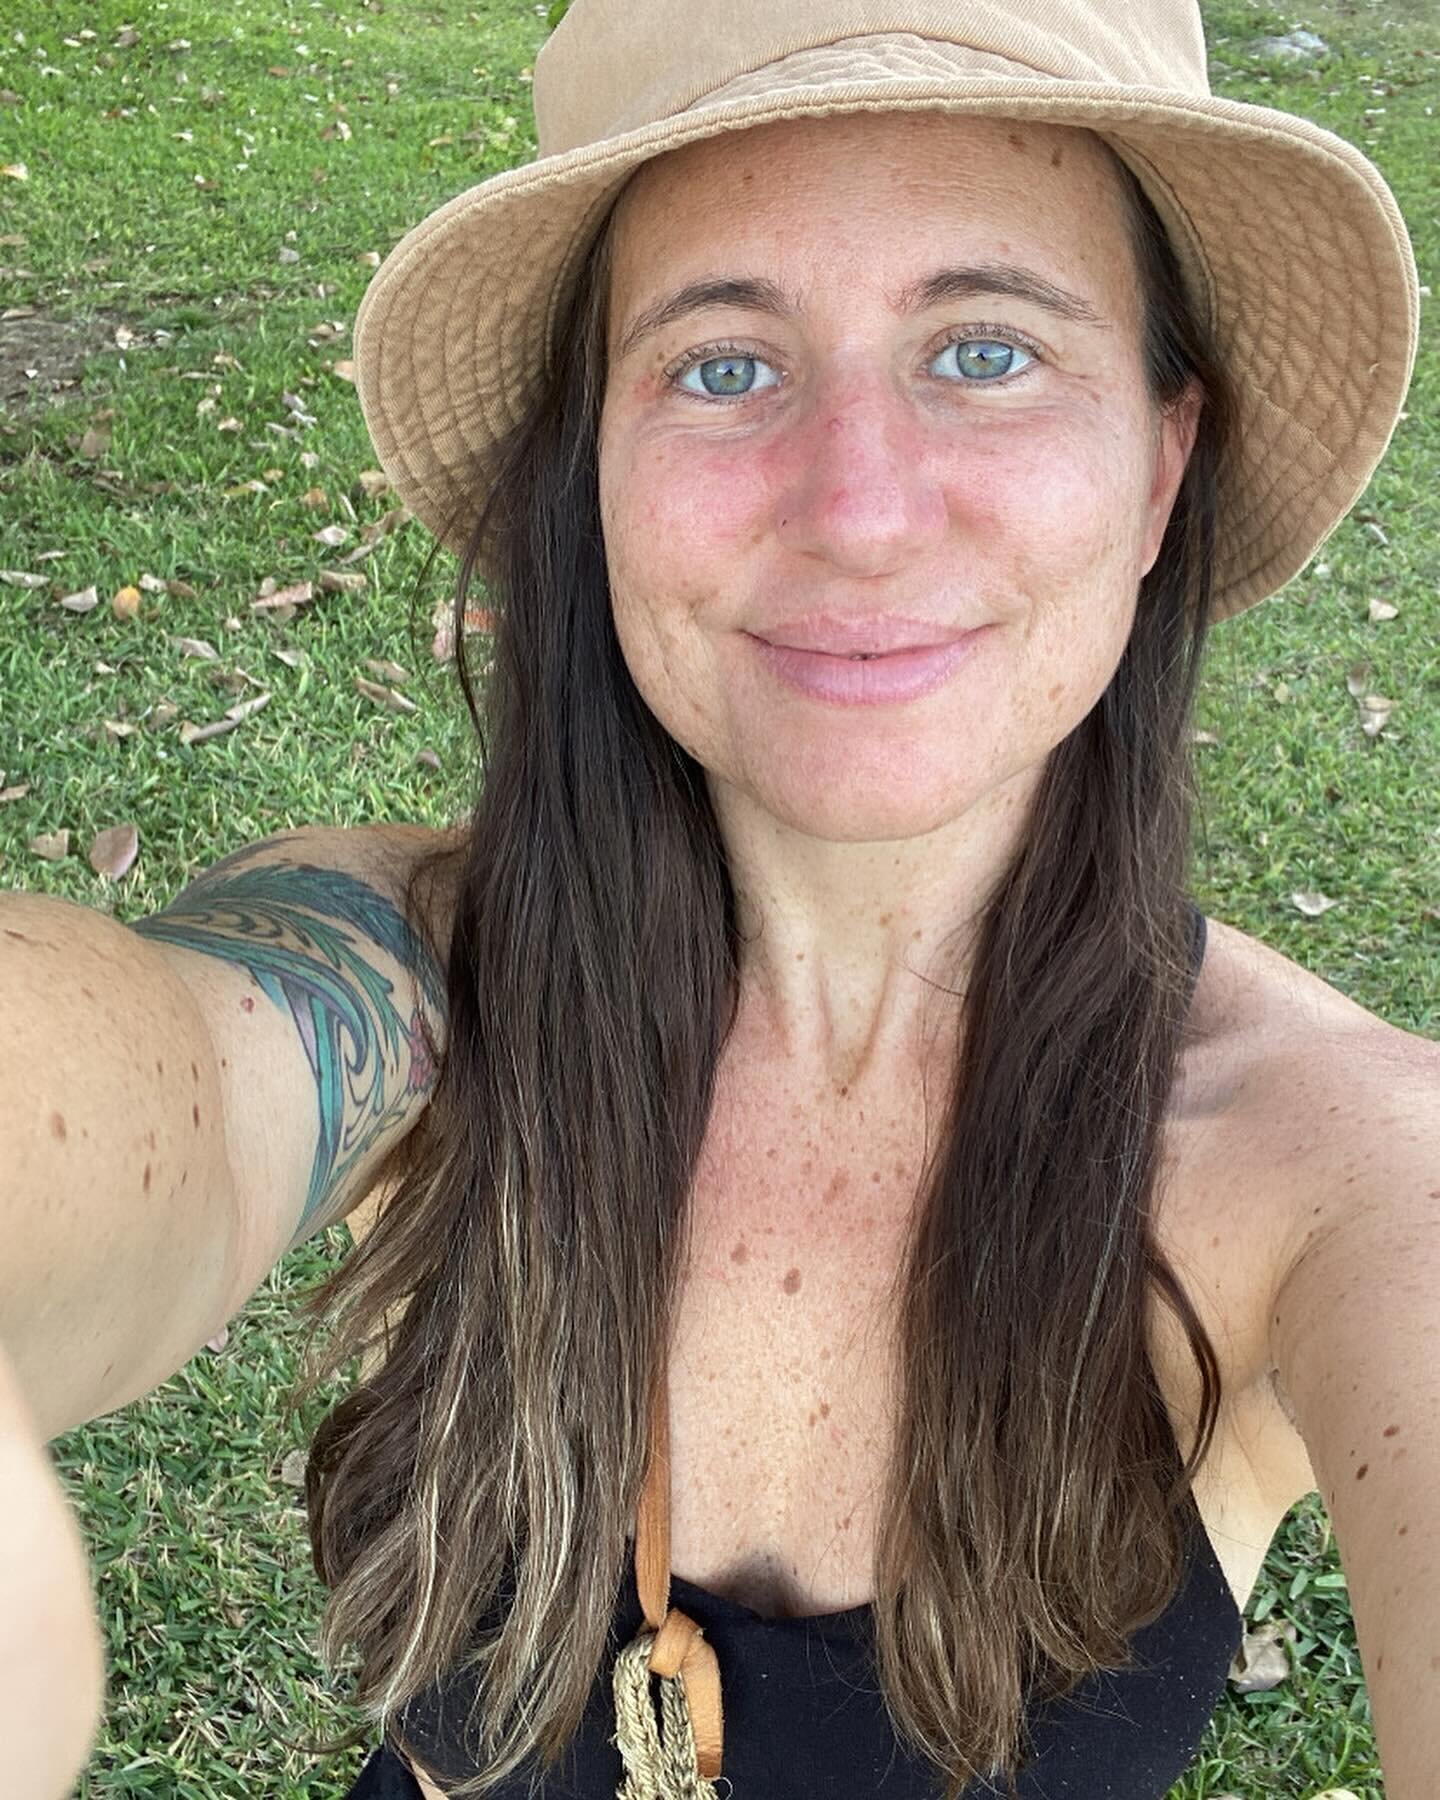 Hi dream makers! I&rsquo;m Kalyn.

If you&rsquo;re new here (or even if you&rsquo;re not), let&rsquo;s get to know each other.

I&rsquo;m a 6/2 Human Design Manifestor, Aries Sun, Scorpio Moon and Rising.

Based in sunshiny St. Petersburg, Florida, b